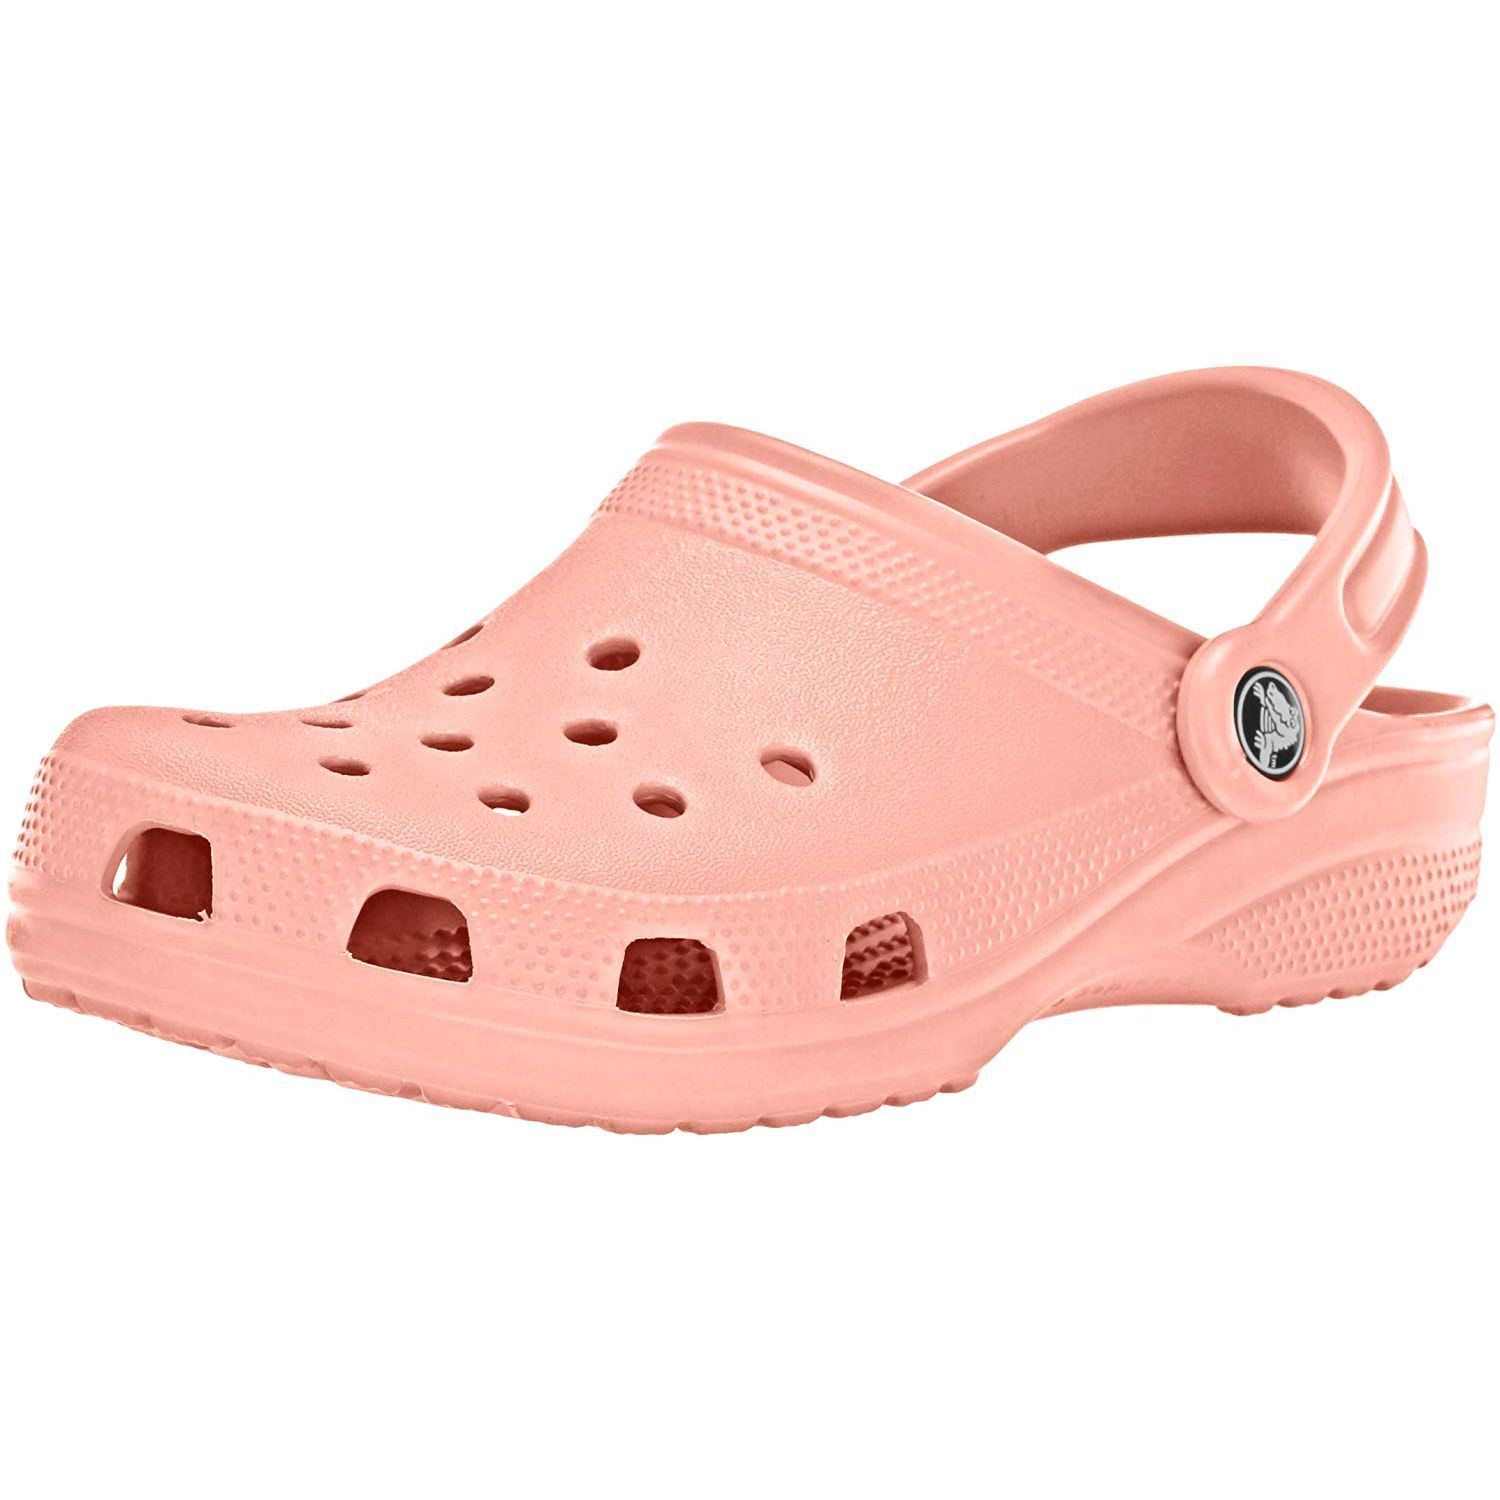 are the crocs on amazon real